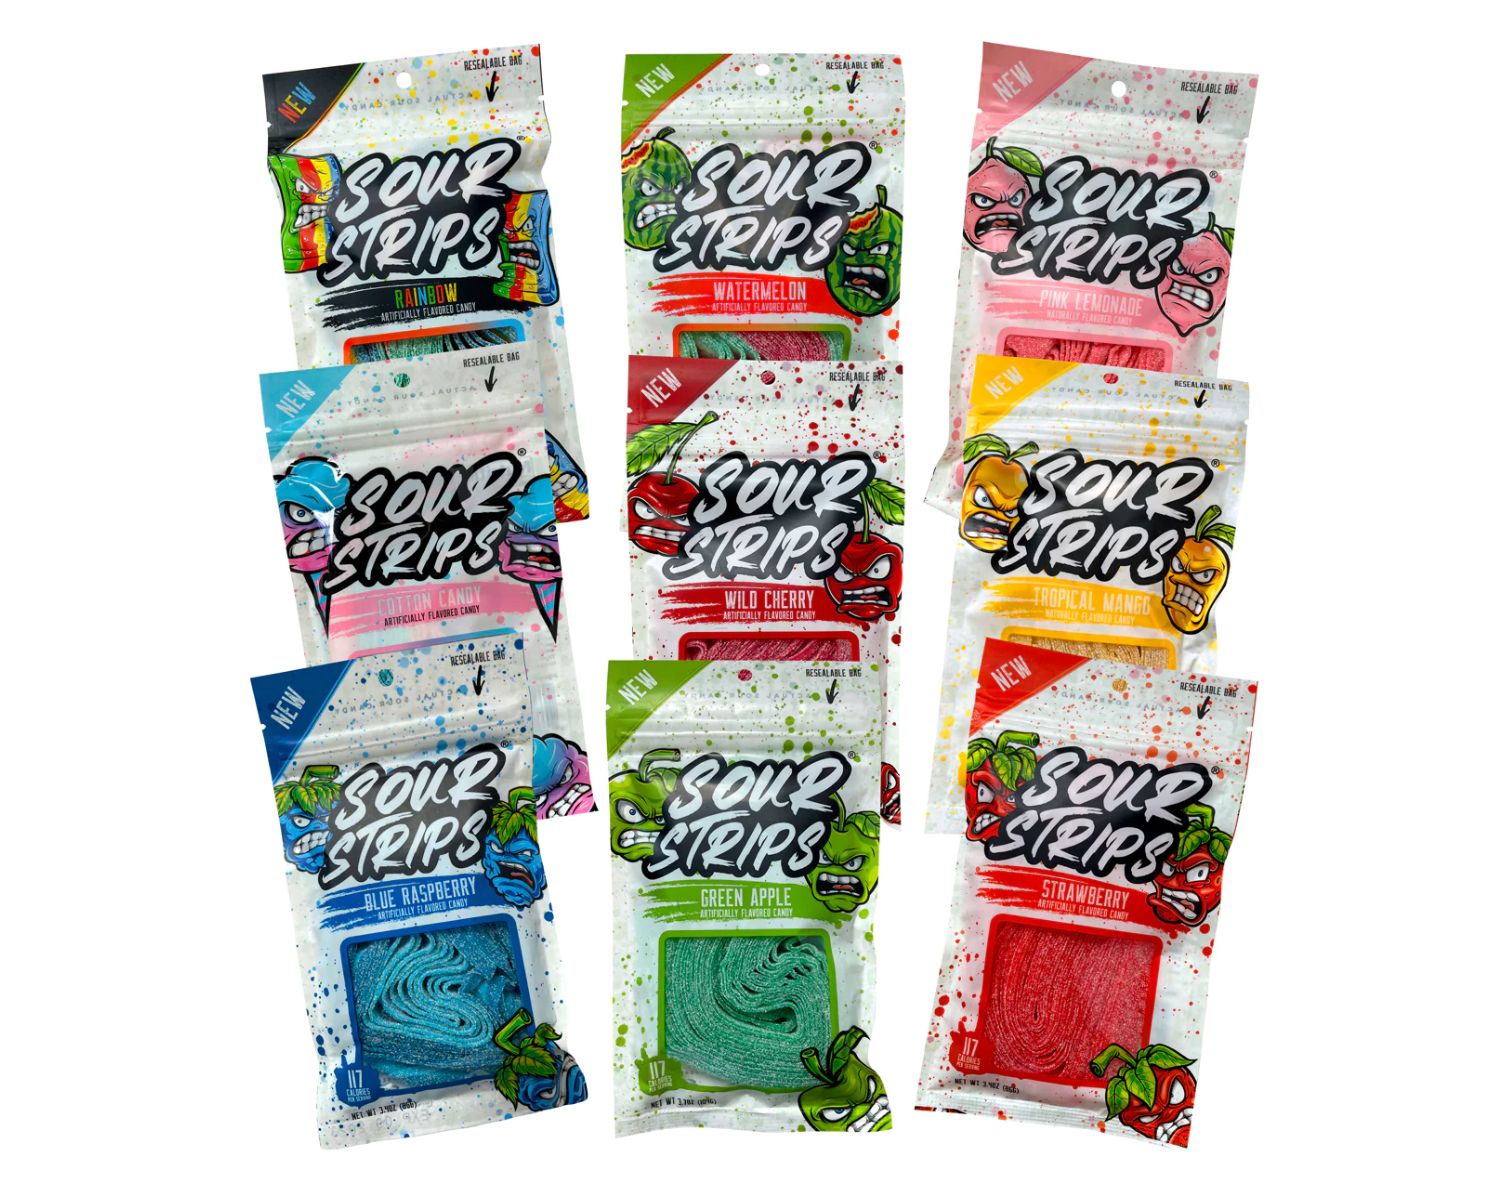 15-sour-strips-nutrition-facts